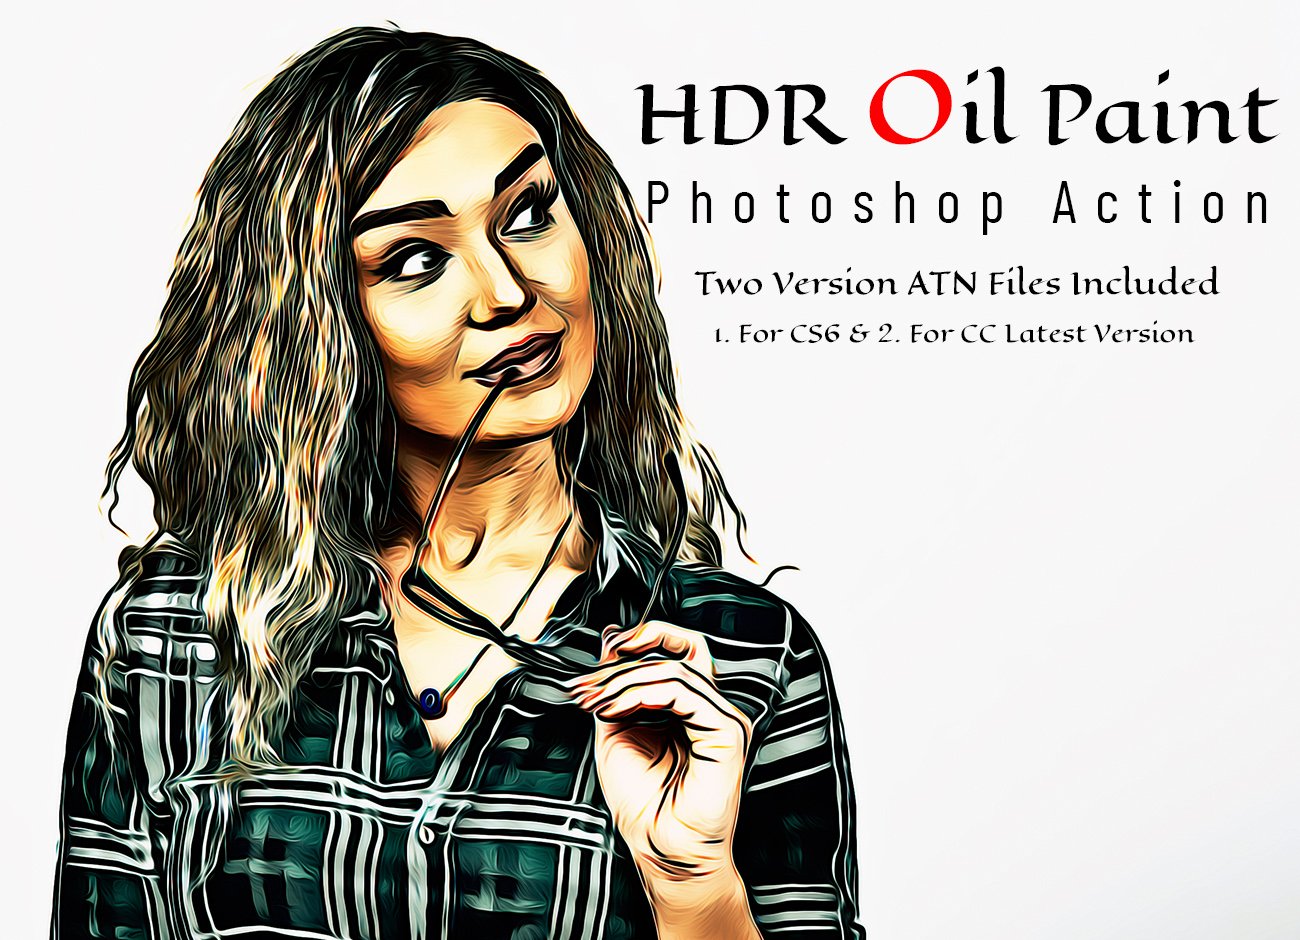 HDR Oil Paint Photoshop Actioncover image.